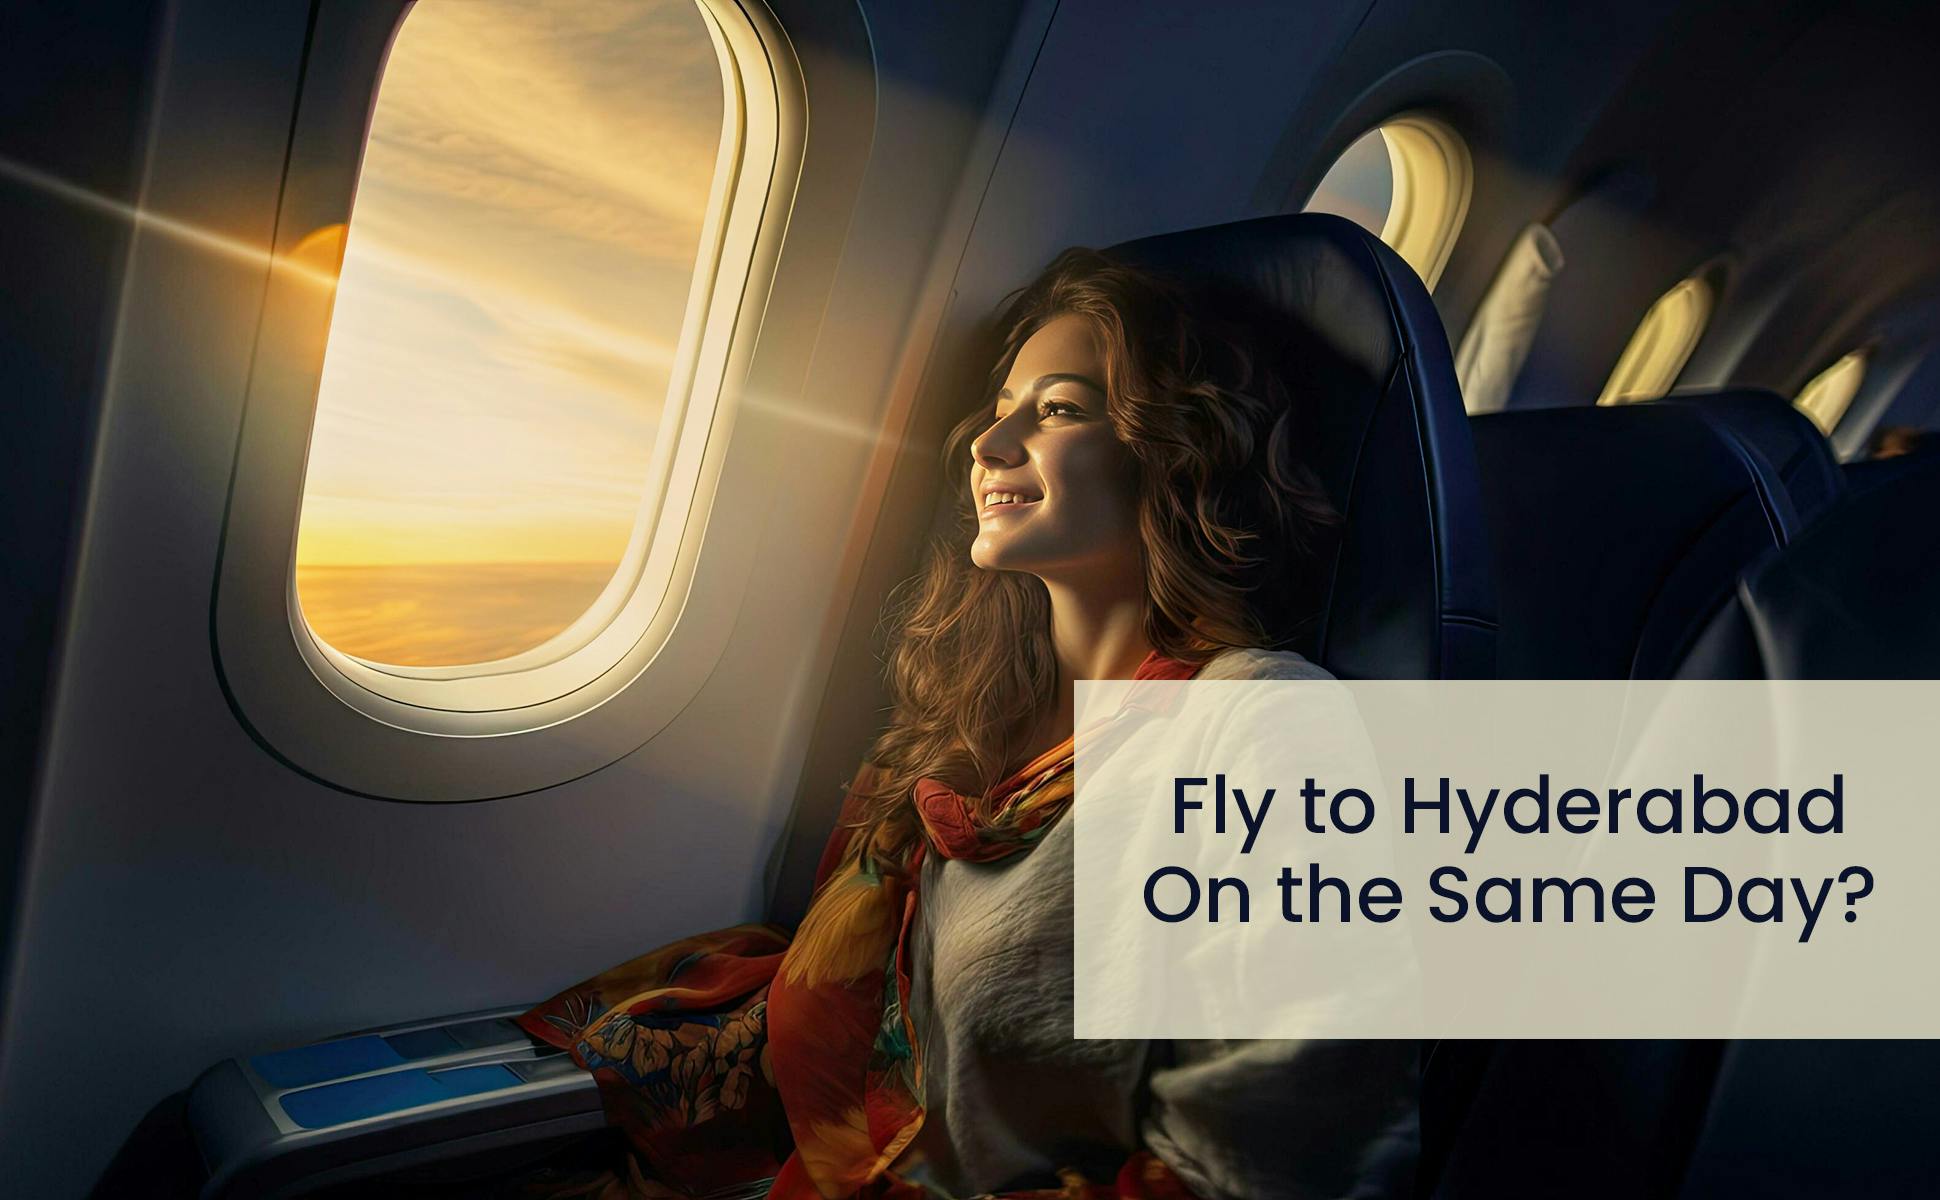 Can I Book and Fly to Hyderabad On the Same Day?